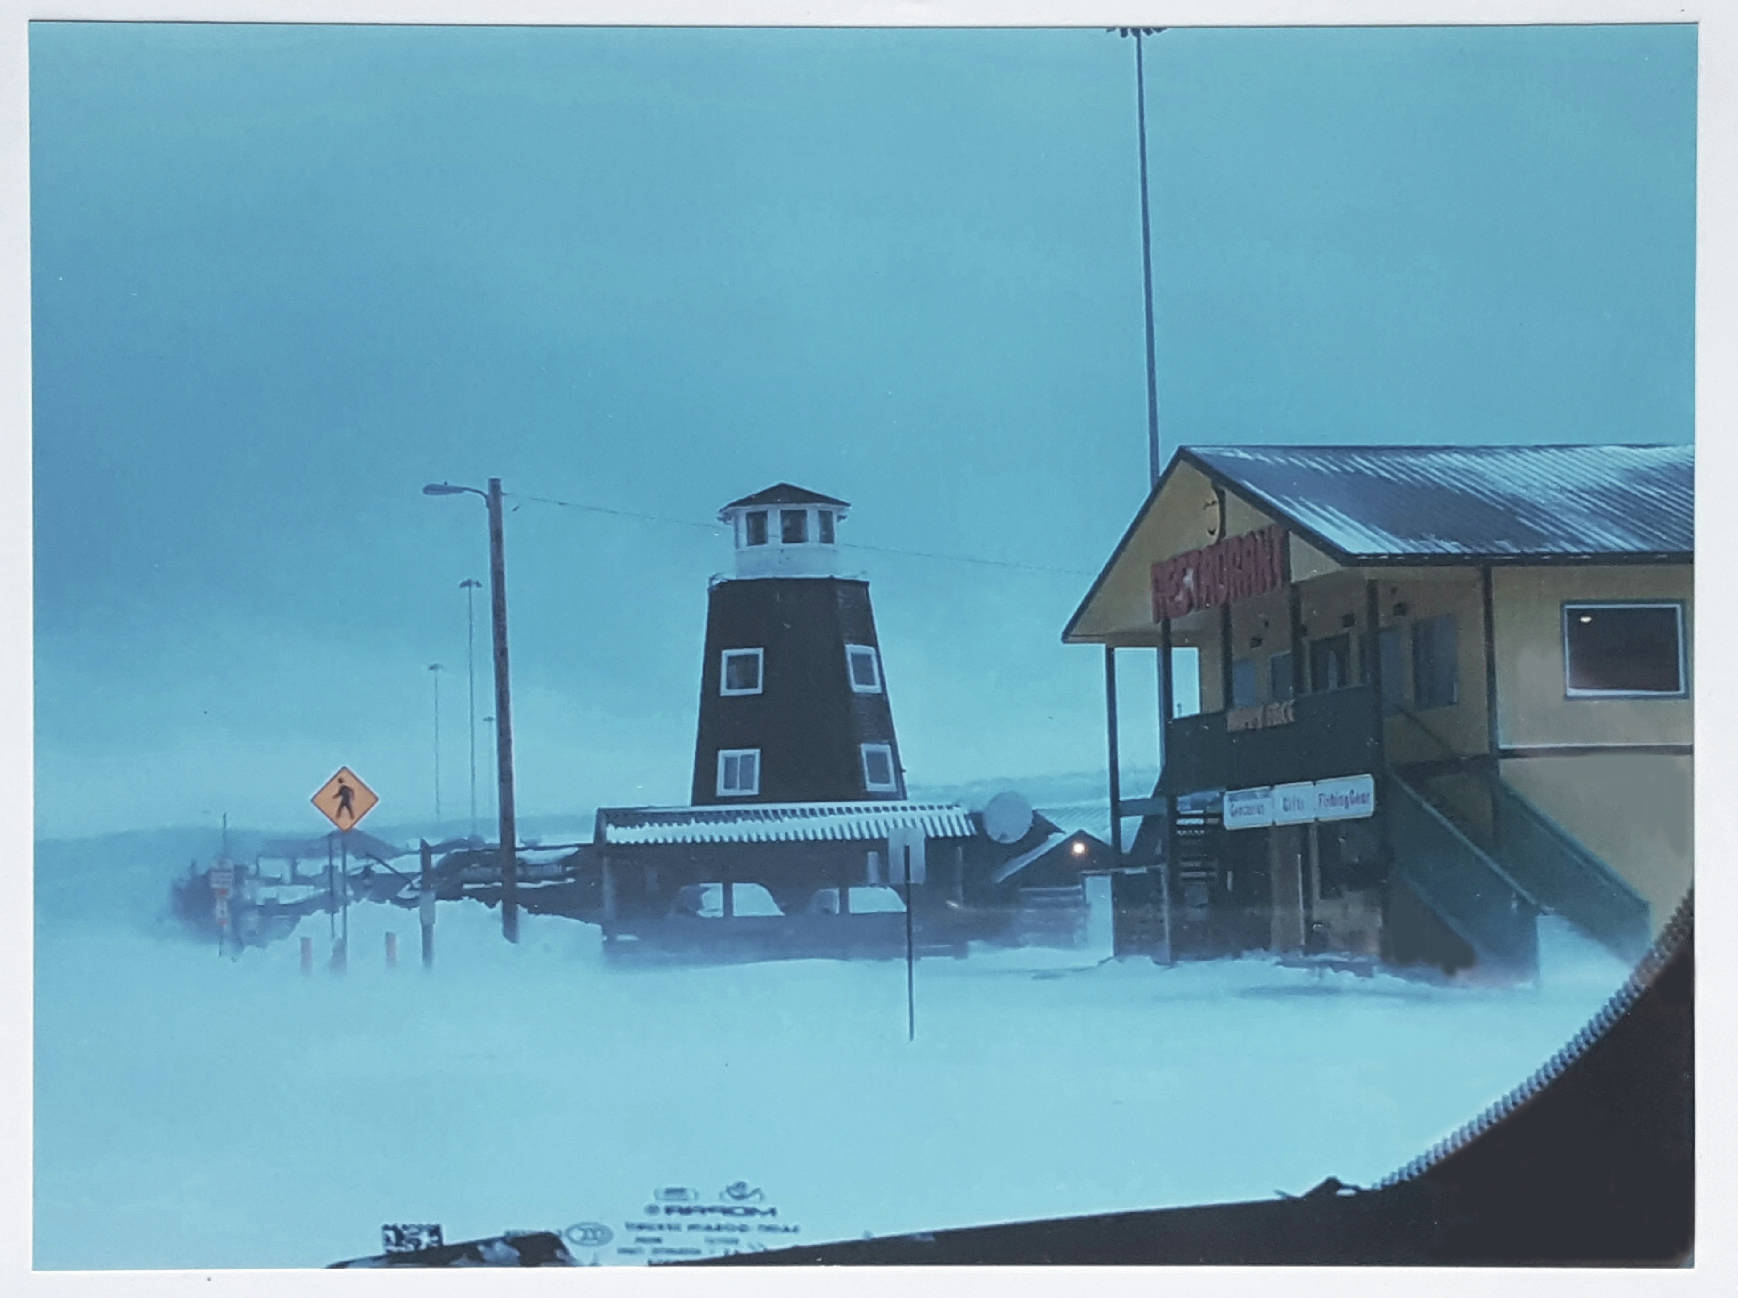 Clara Cole’s photograph is part of an exhibit starting Friday, March 6, 2020, at the Homer Council on the Arts in Homer, Alaska. (Photo courtesy of Homer Council on the Arts)